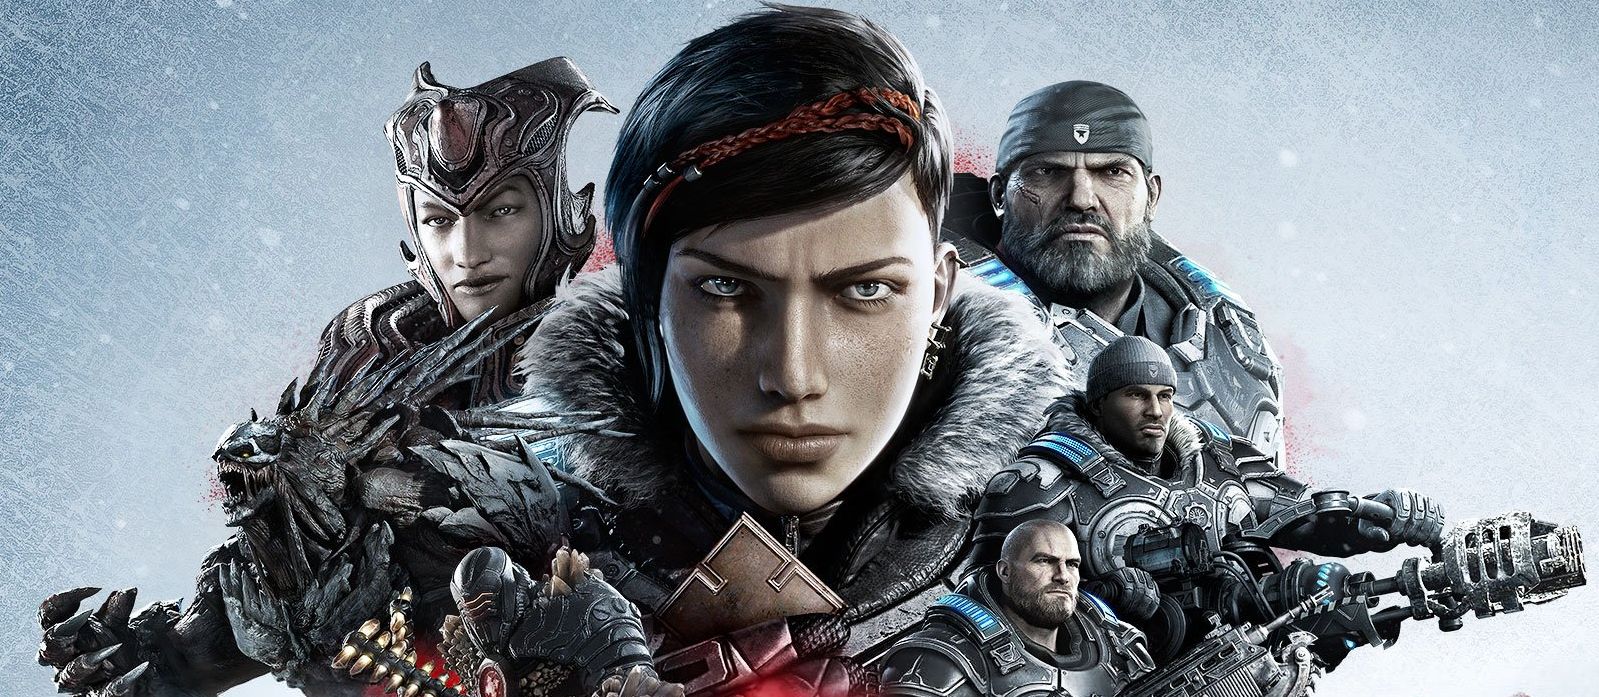 Image for Xbox Games with Gold February: Gears 5, Resident Evil, more